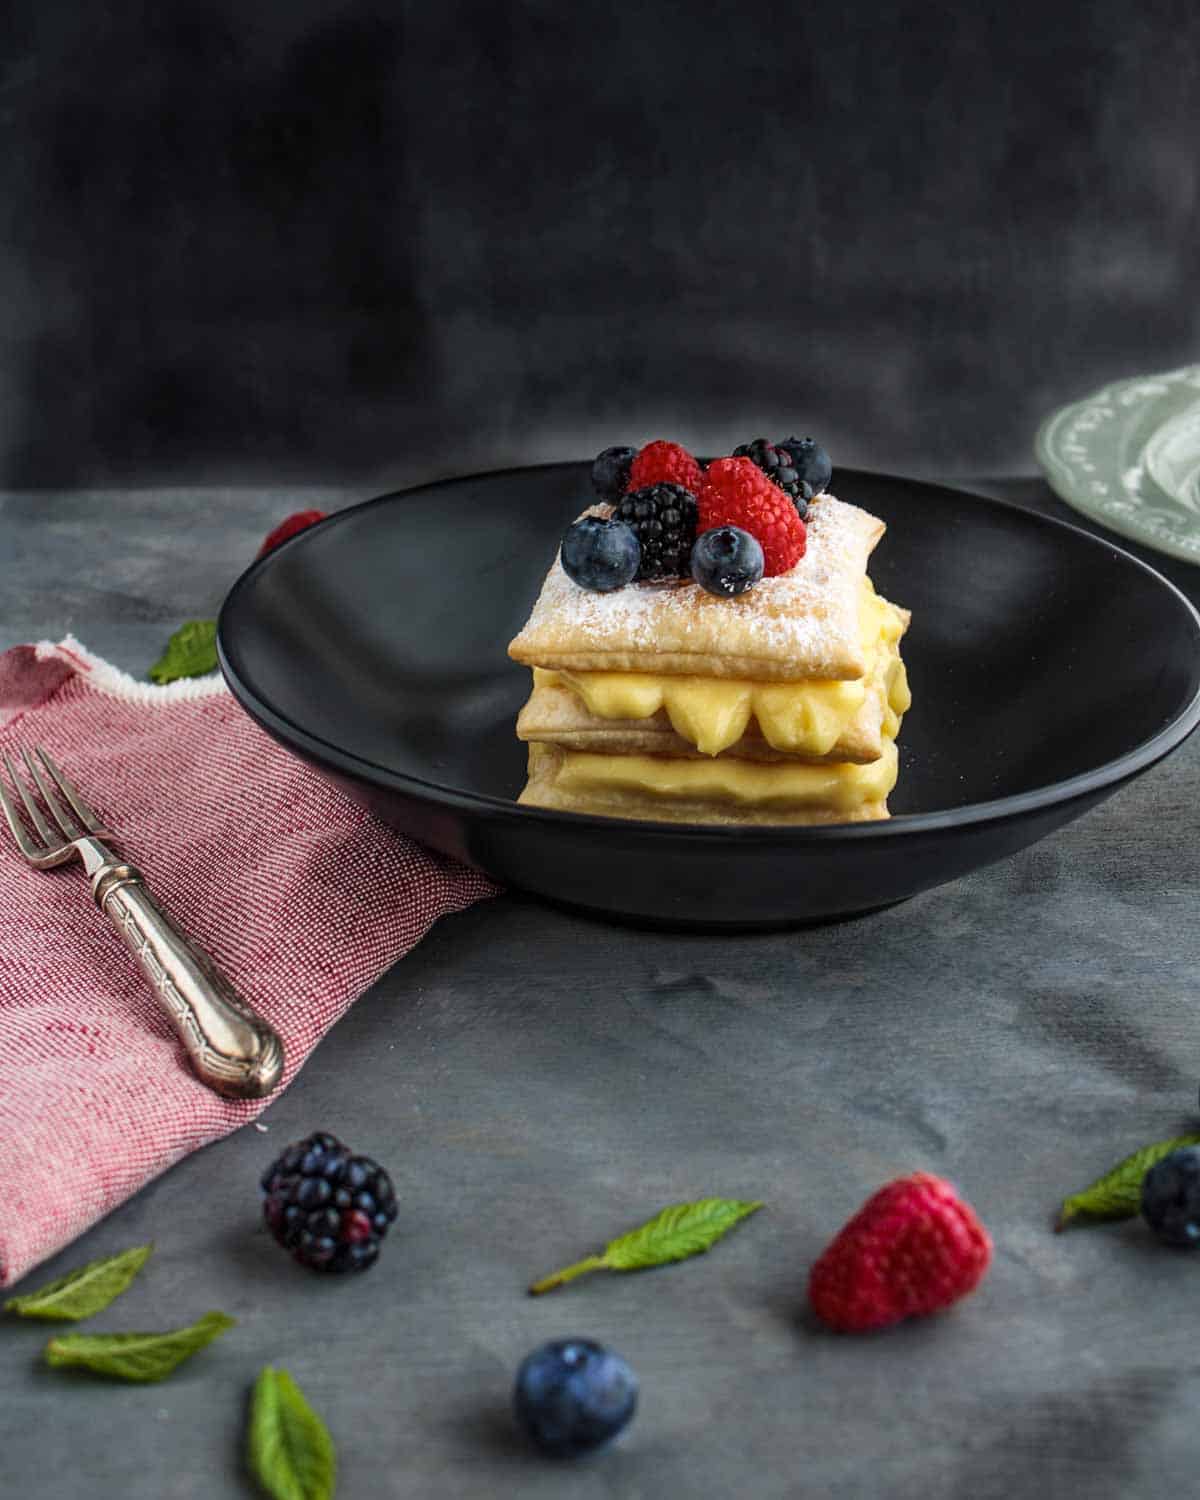 A slice of Millefoglie with Vanilla Custard and Wild Berries-on-a-black-dish-showing-the-custard-inside